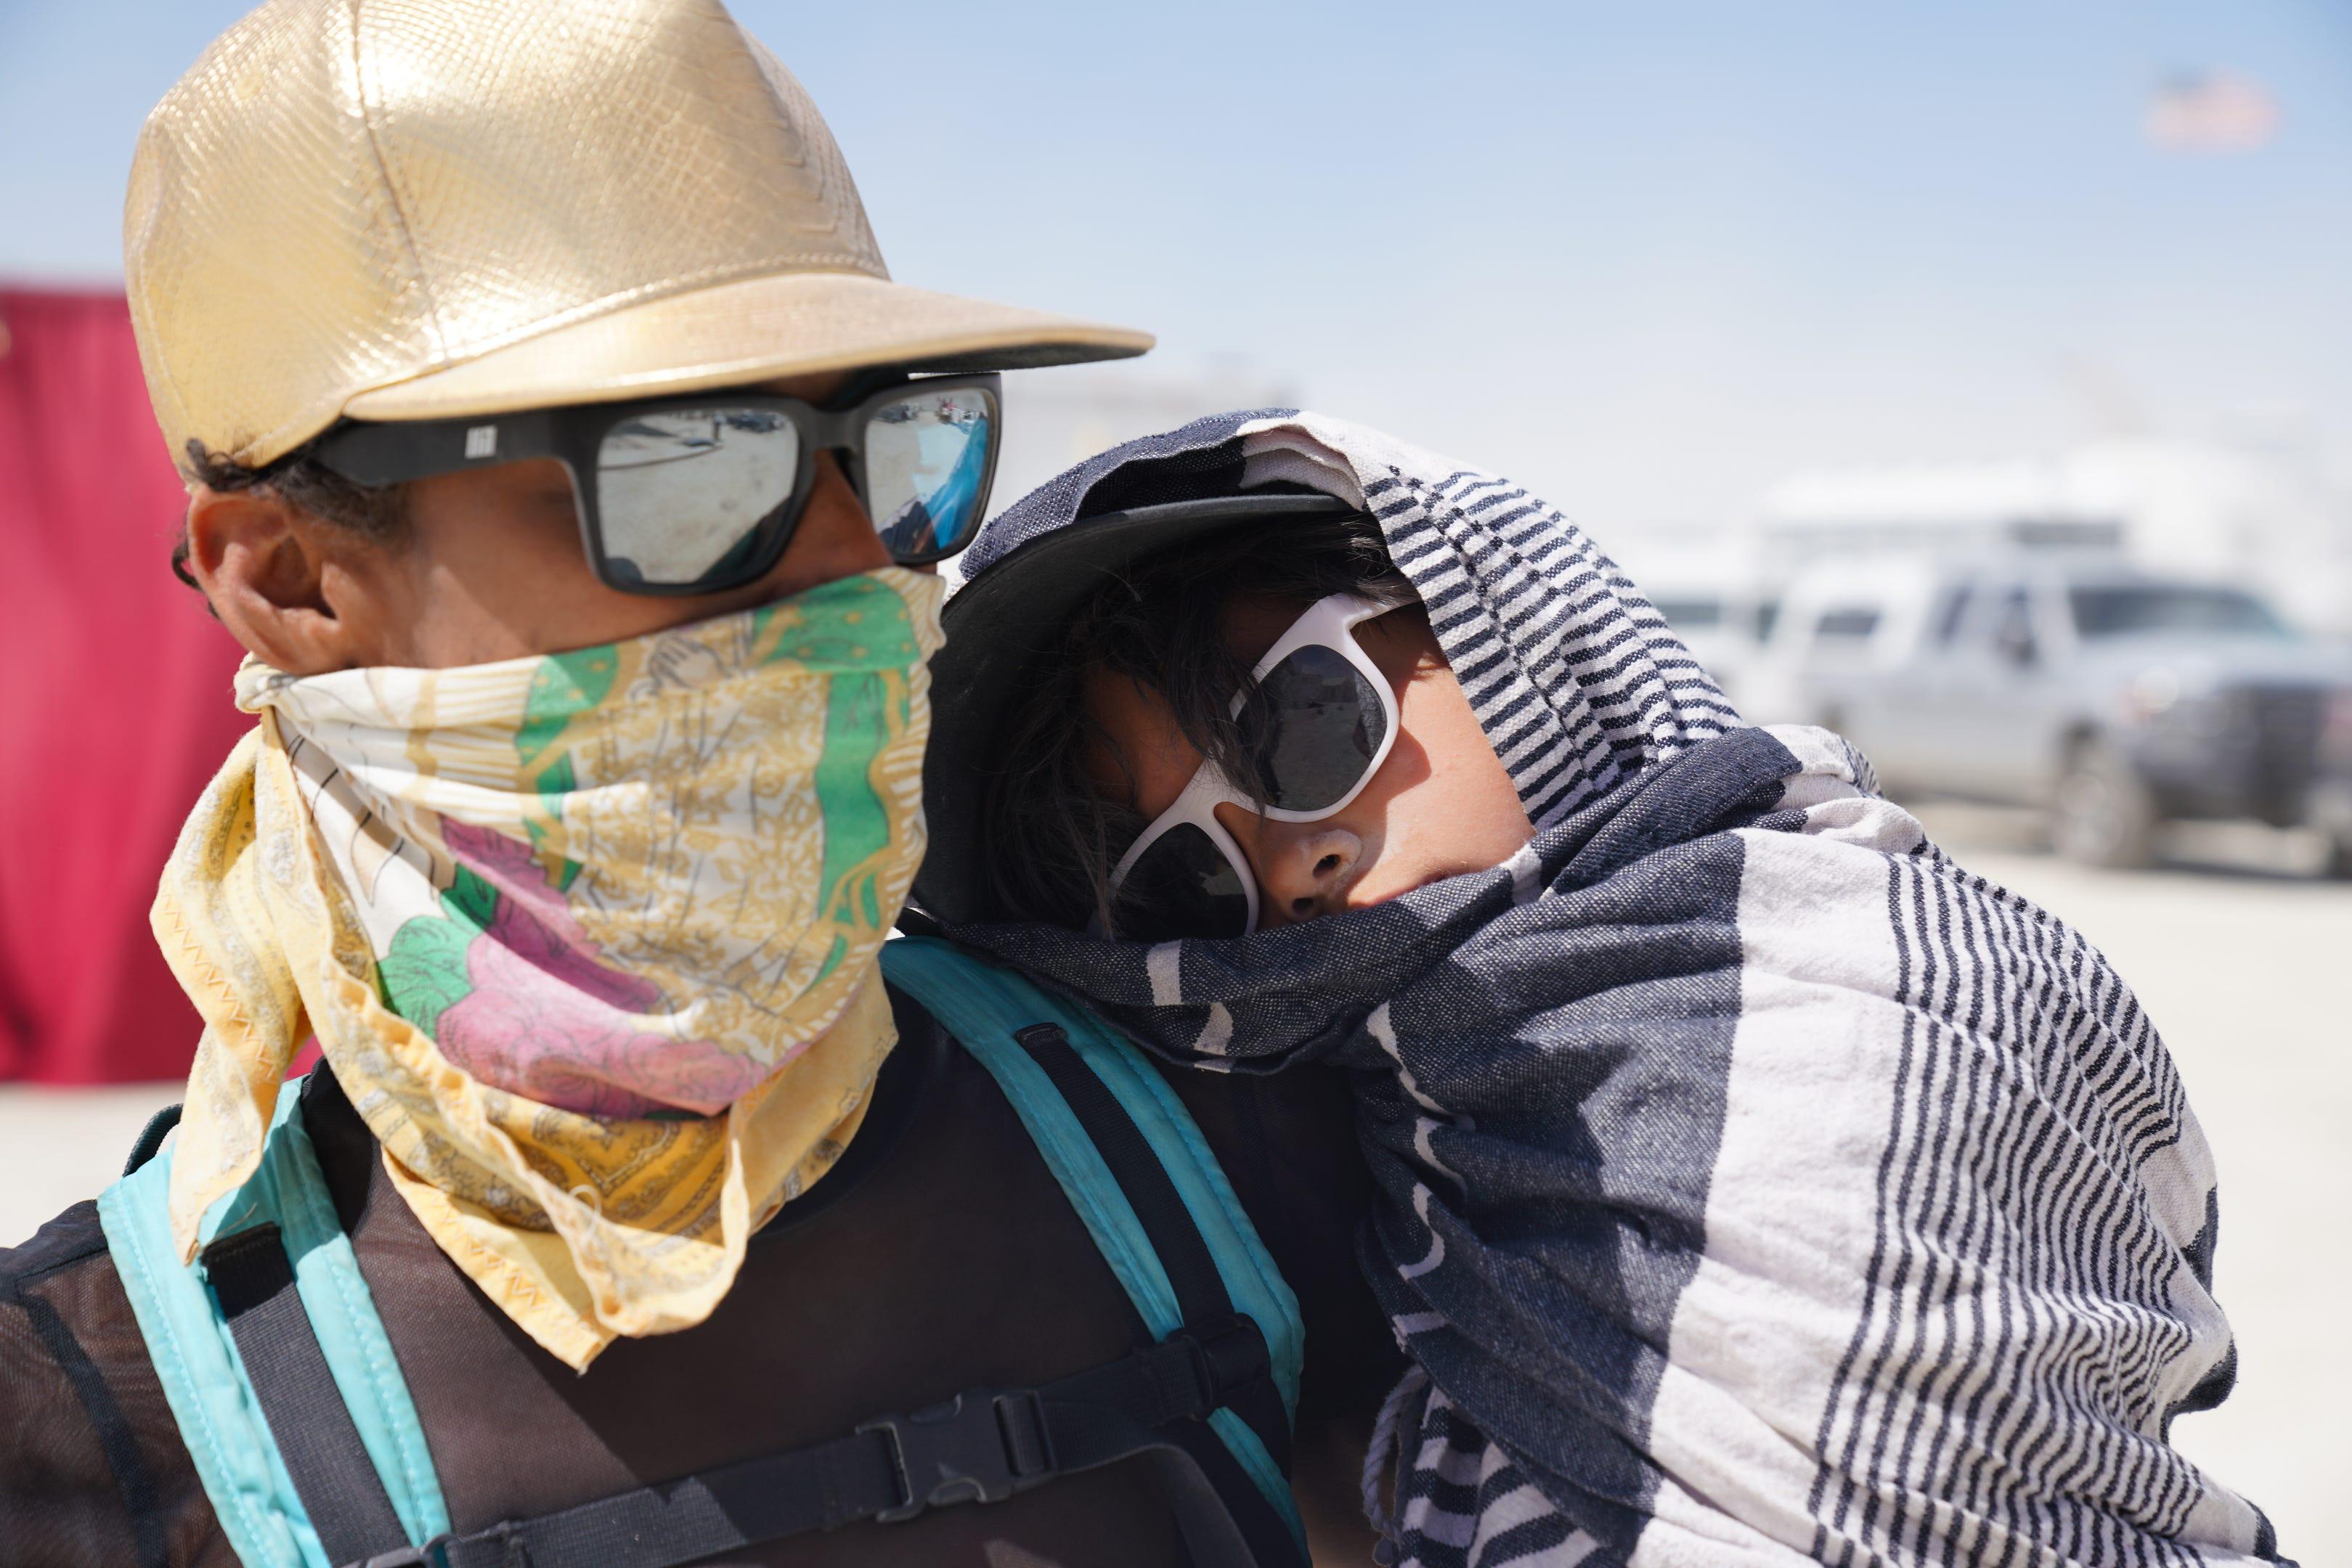 Tracie Williams of Portland carries her son, known at Burning Man as "Pool Boi 01" during a dust storm at the event.